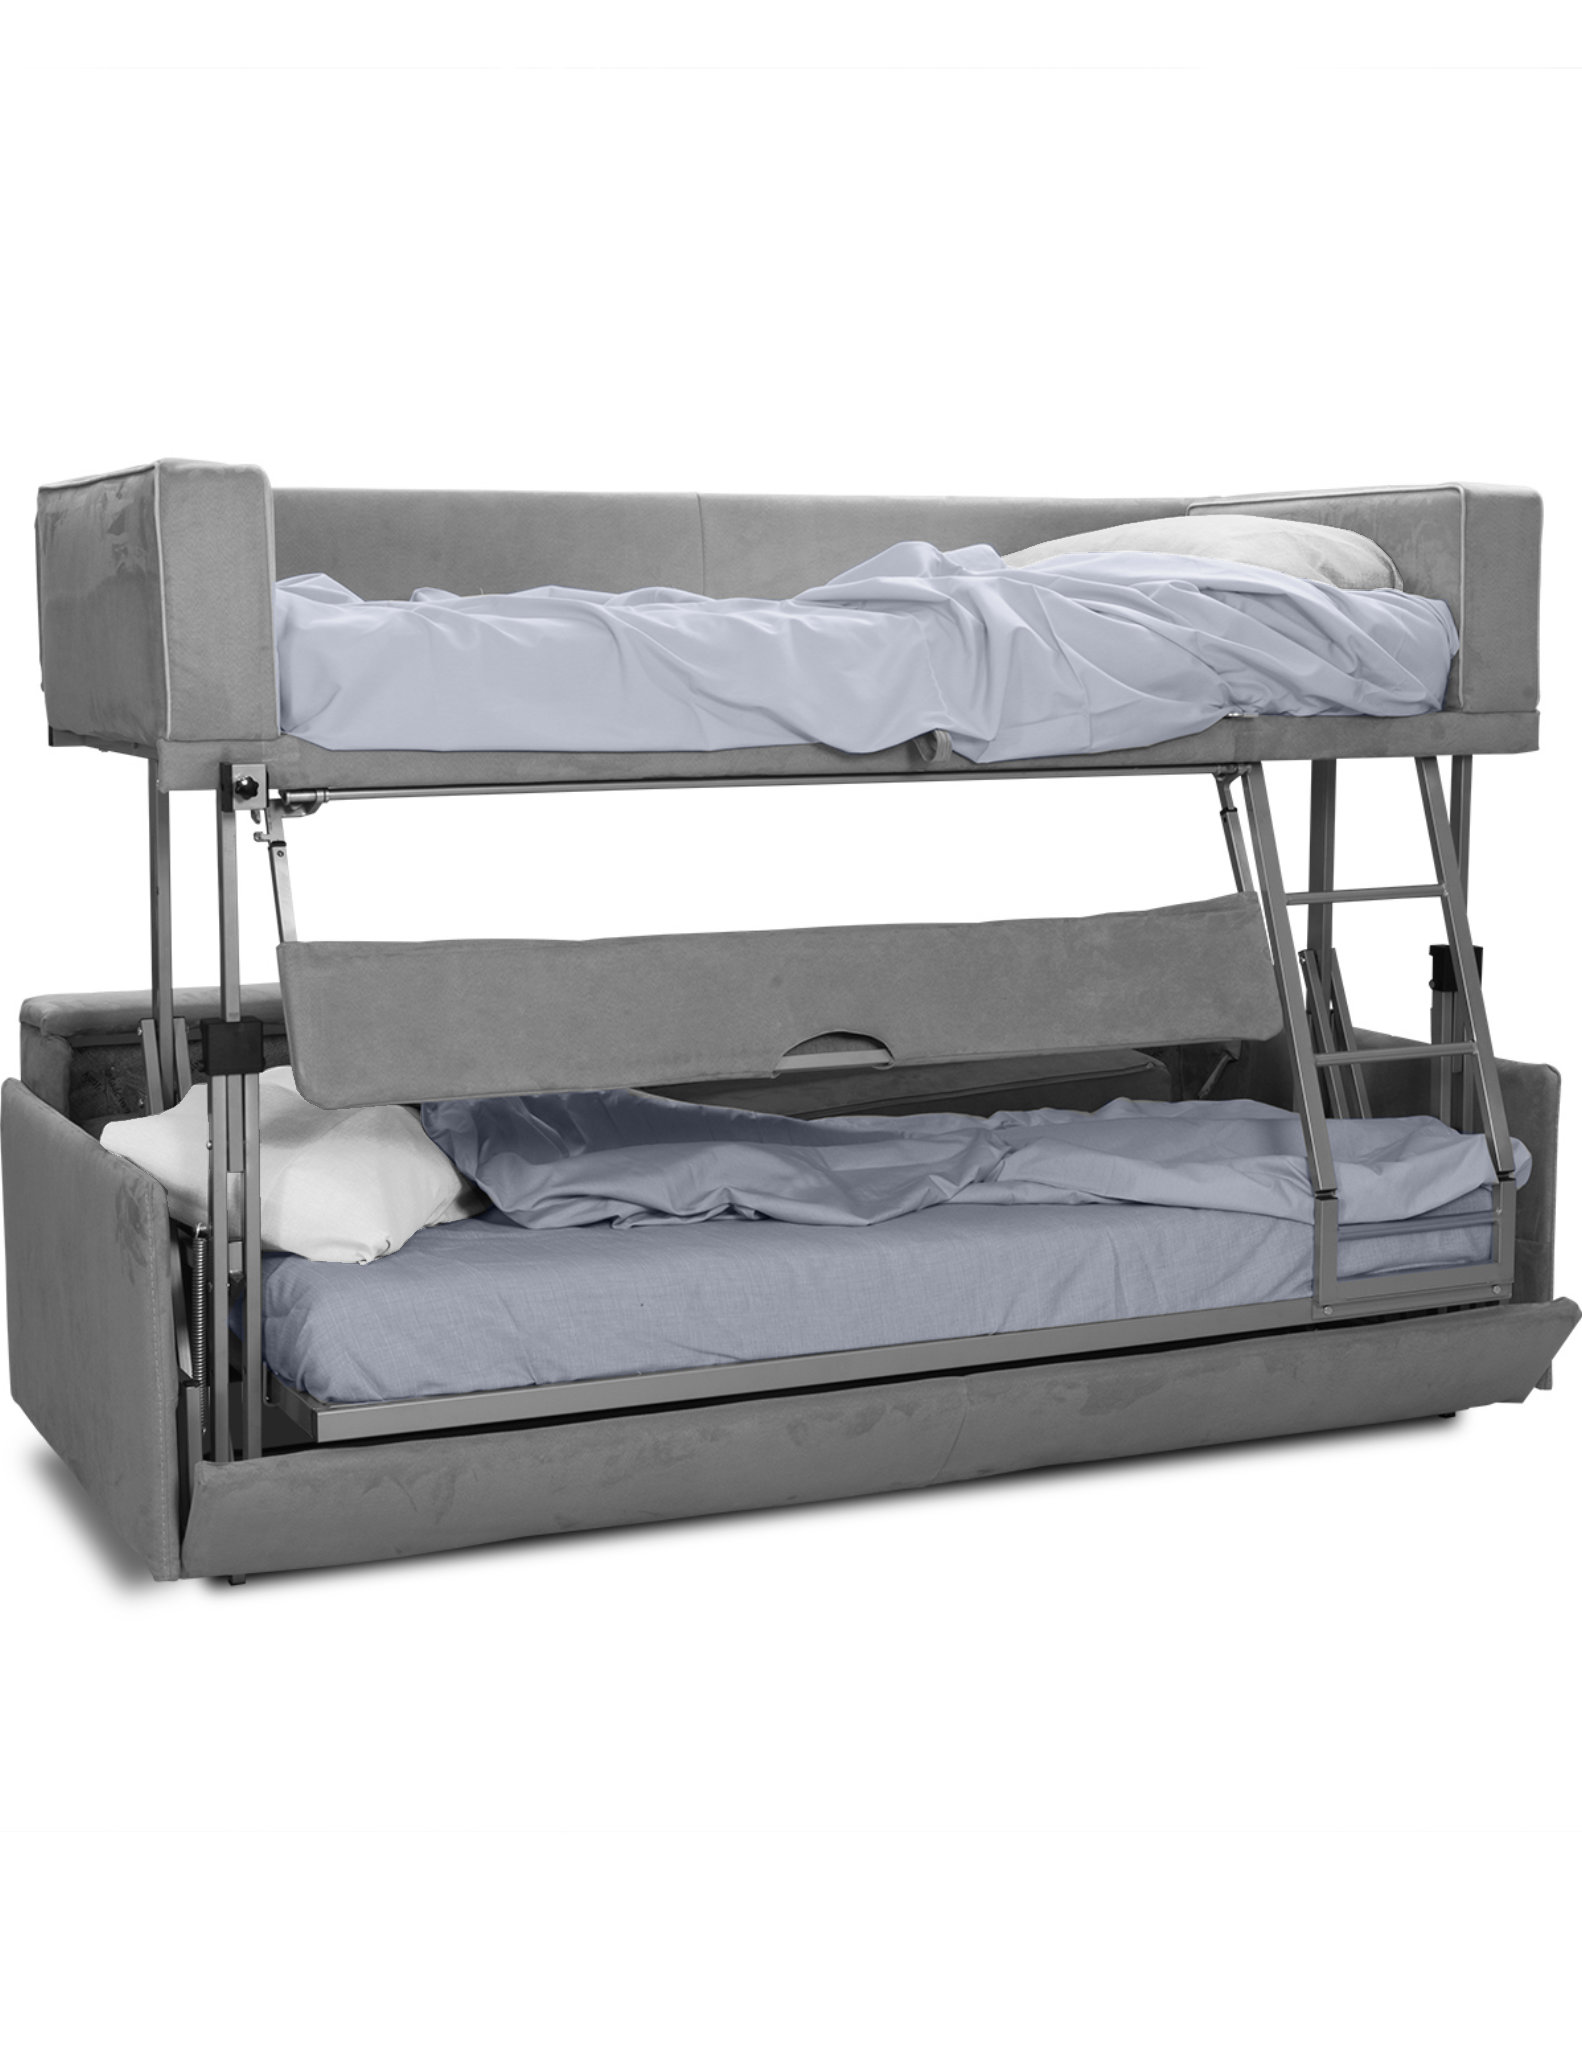 Bunk Bed Couch Transformer, Bunk Bed Transformer